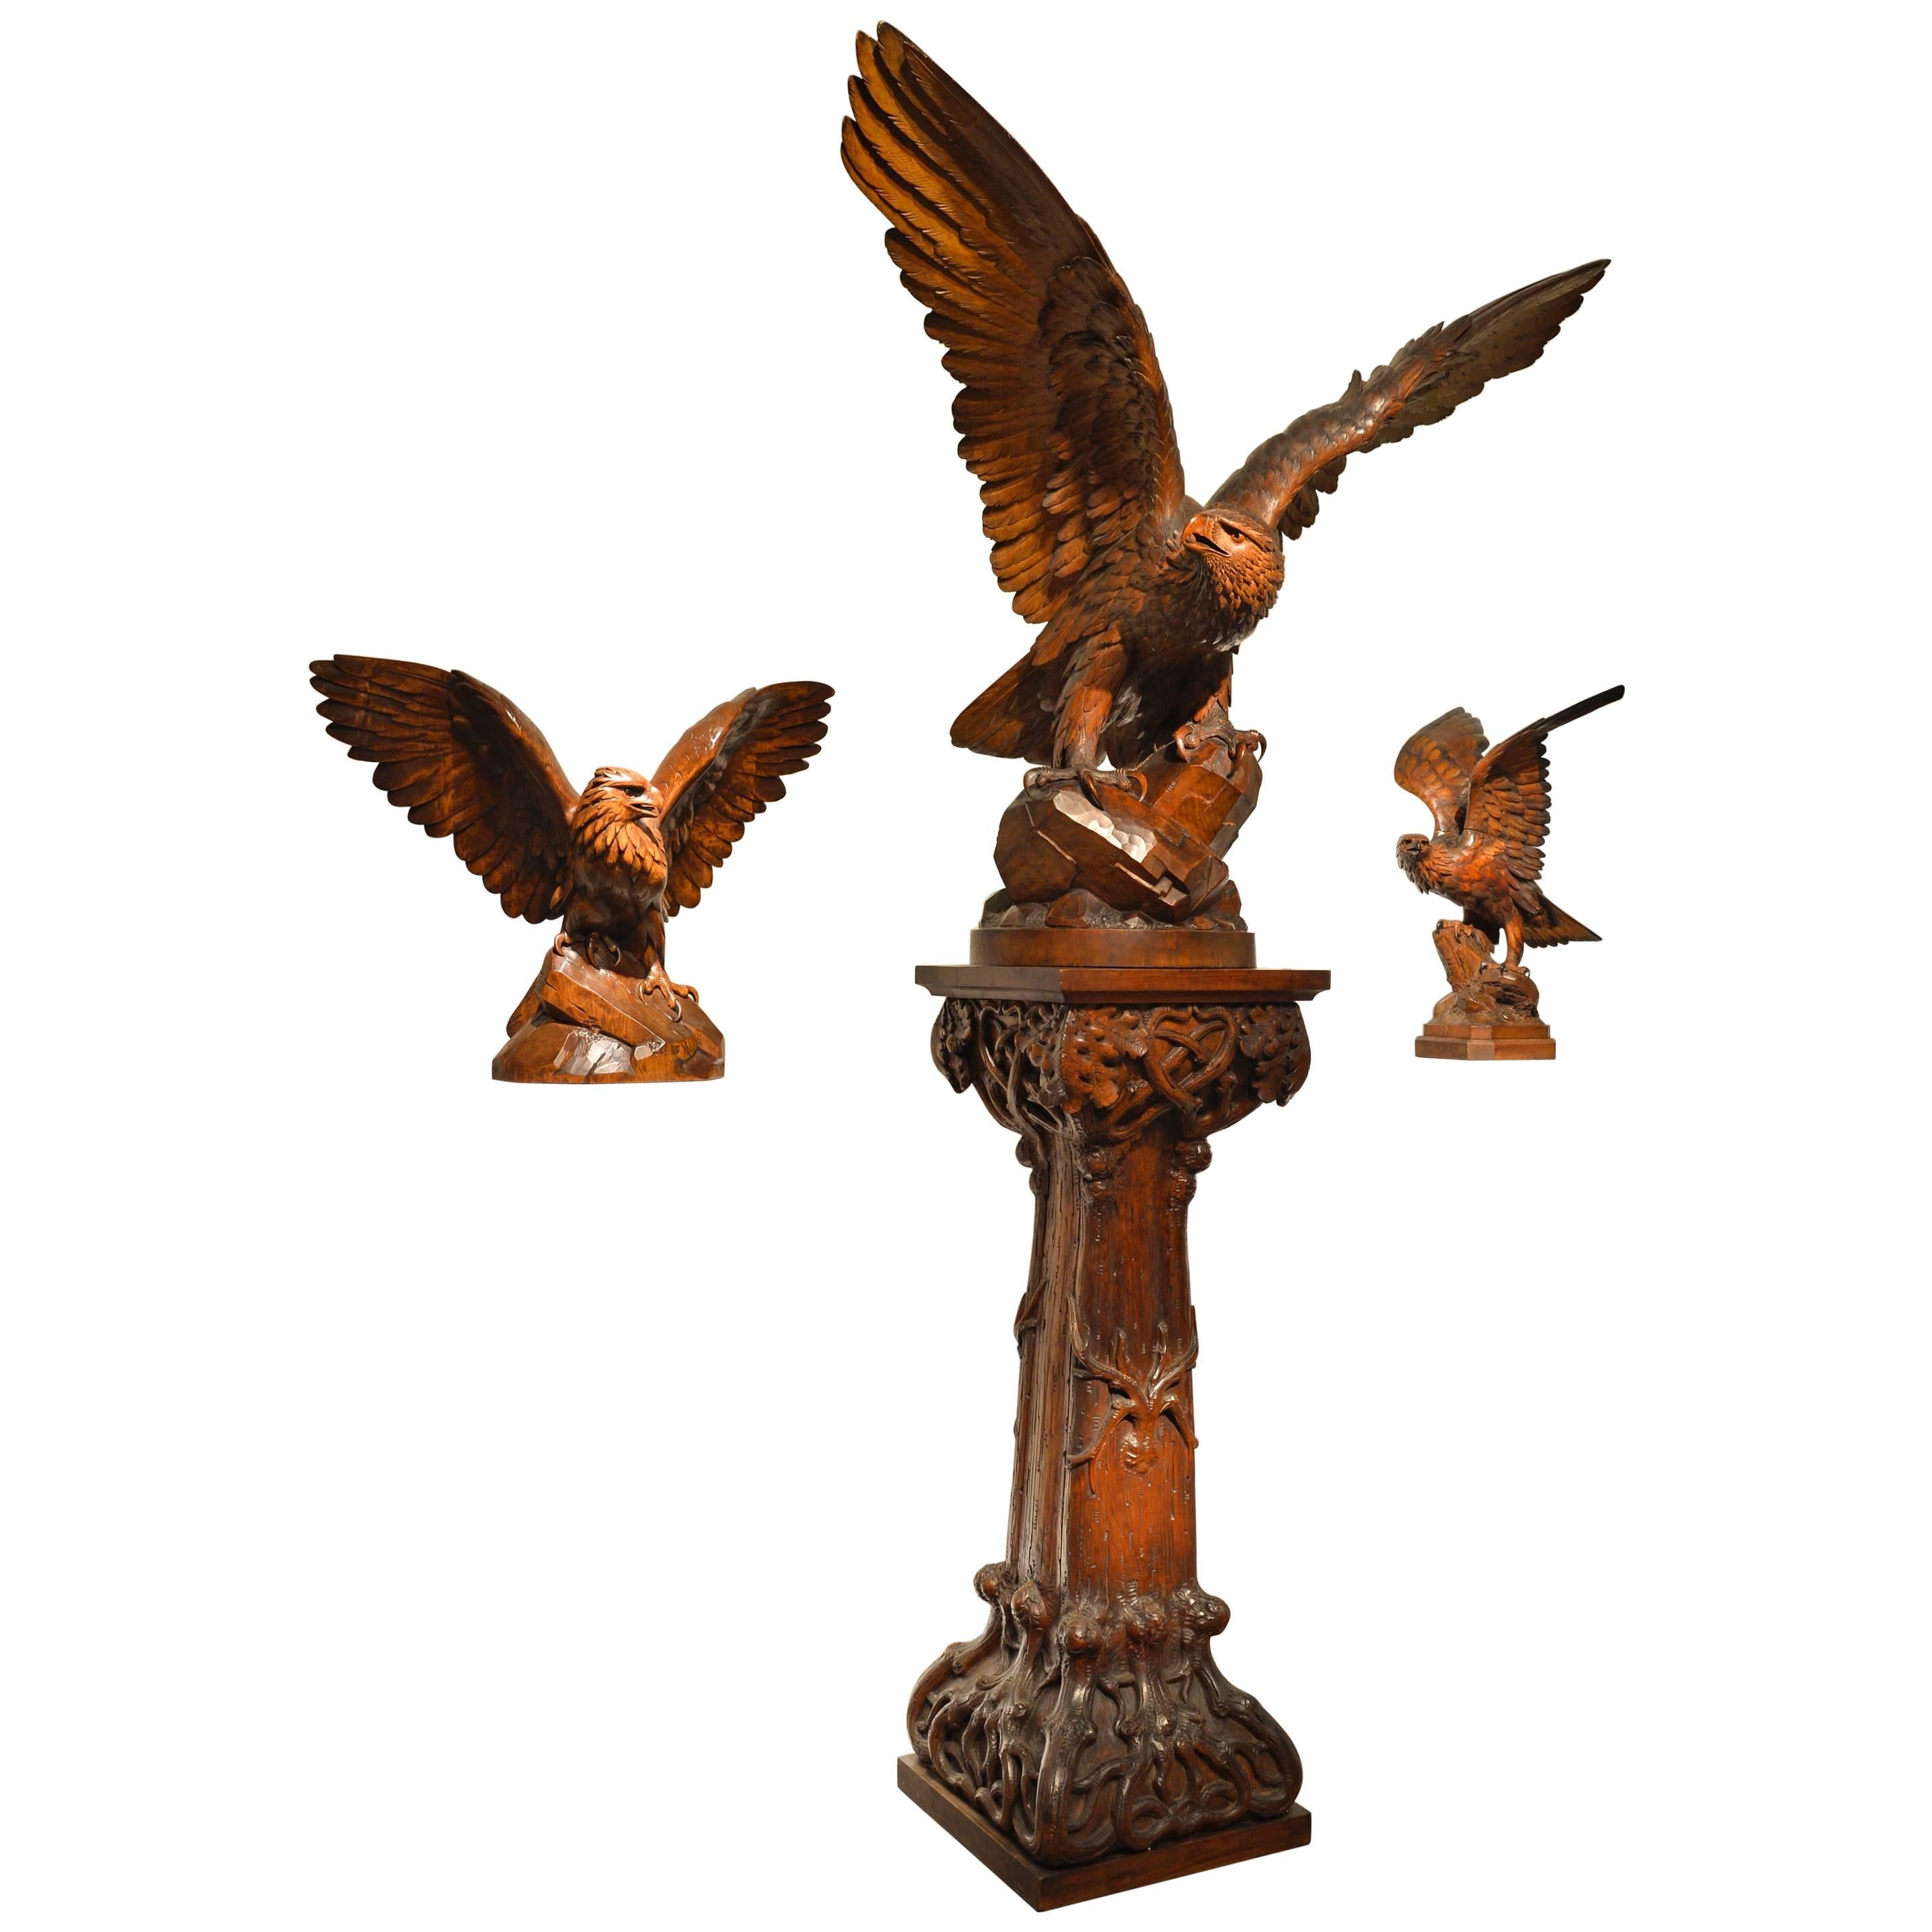 An impressive and monumental ‘Black Forest’ walnut carving of a Golden eagle per